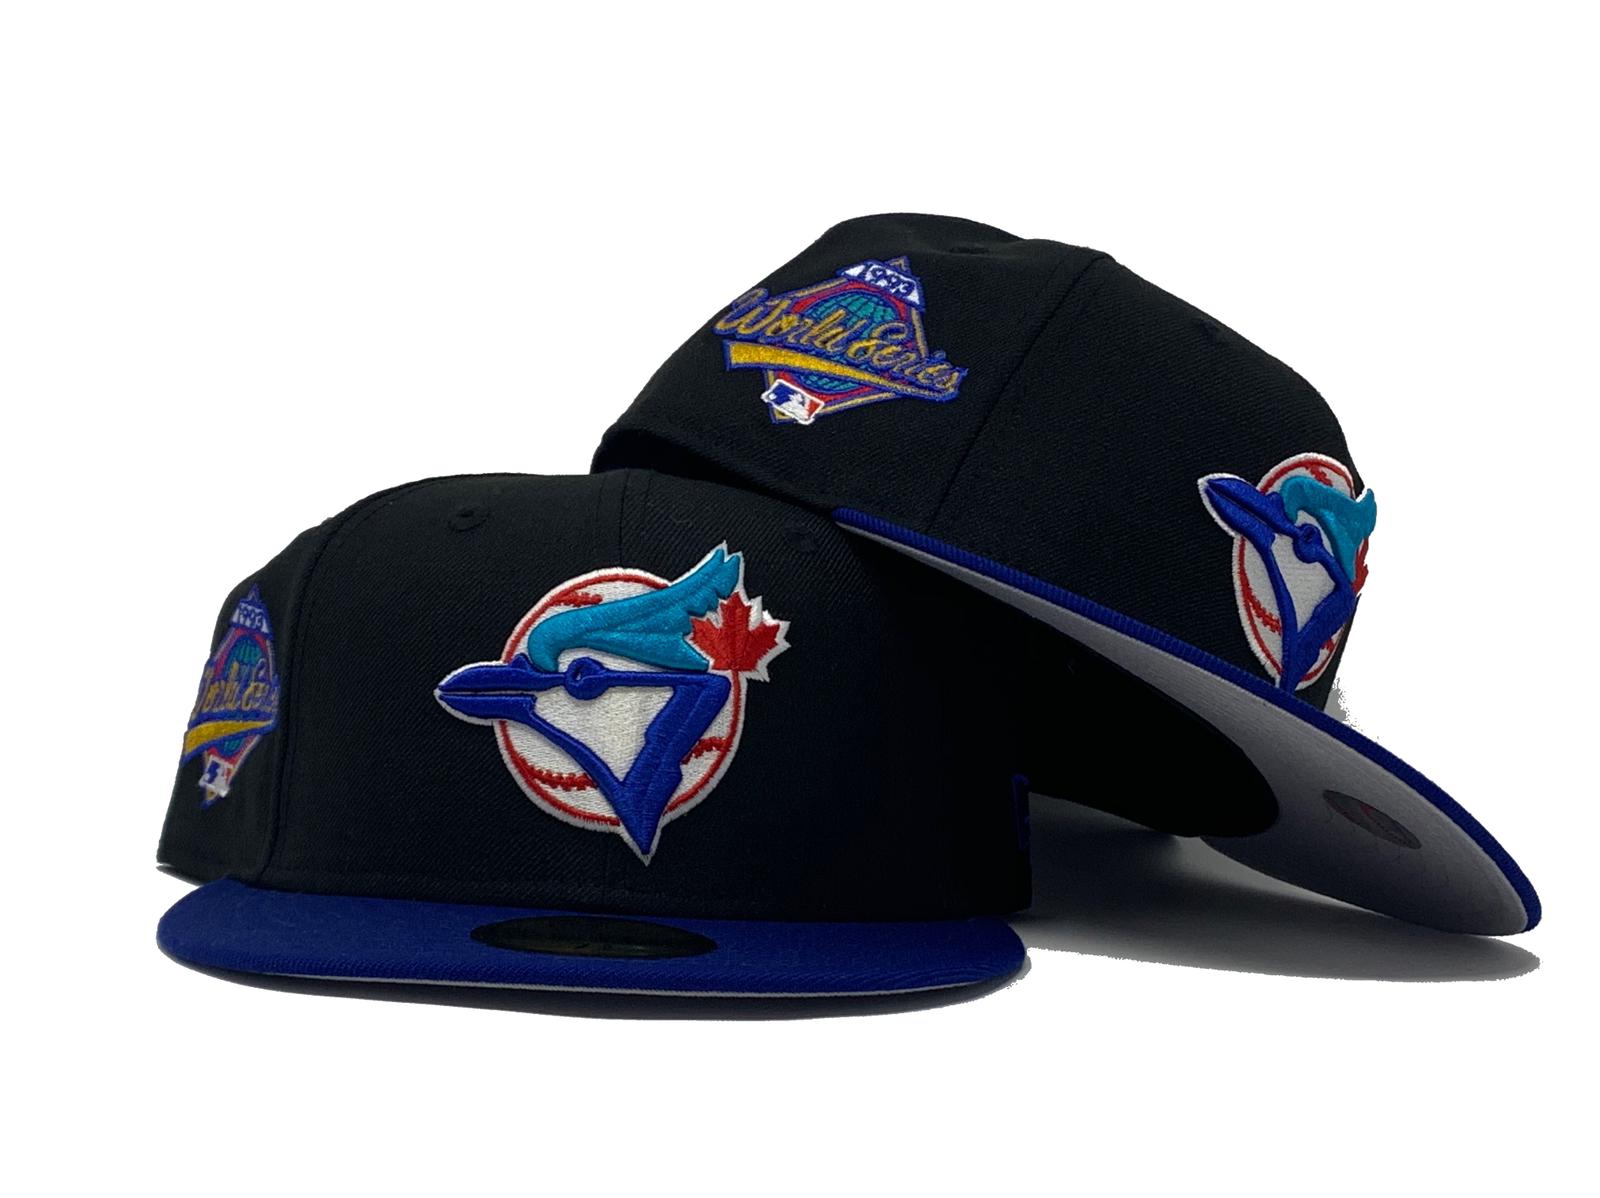 My First Fitted. Blue Jays 1993 World Series! : r/neweracaps